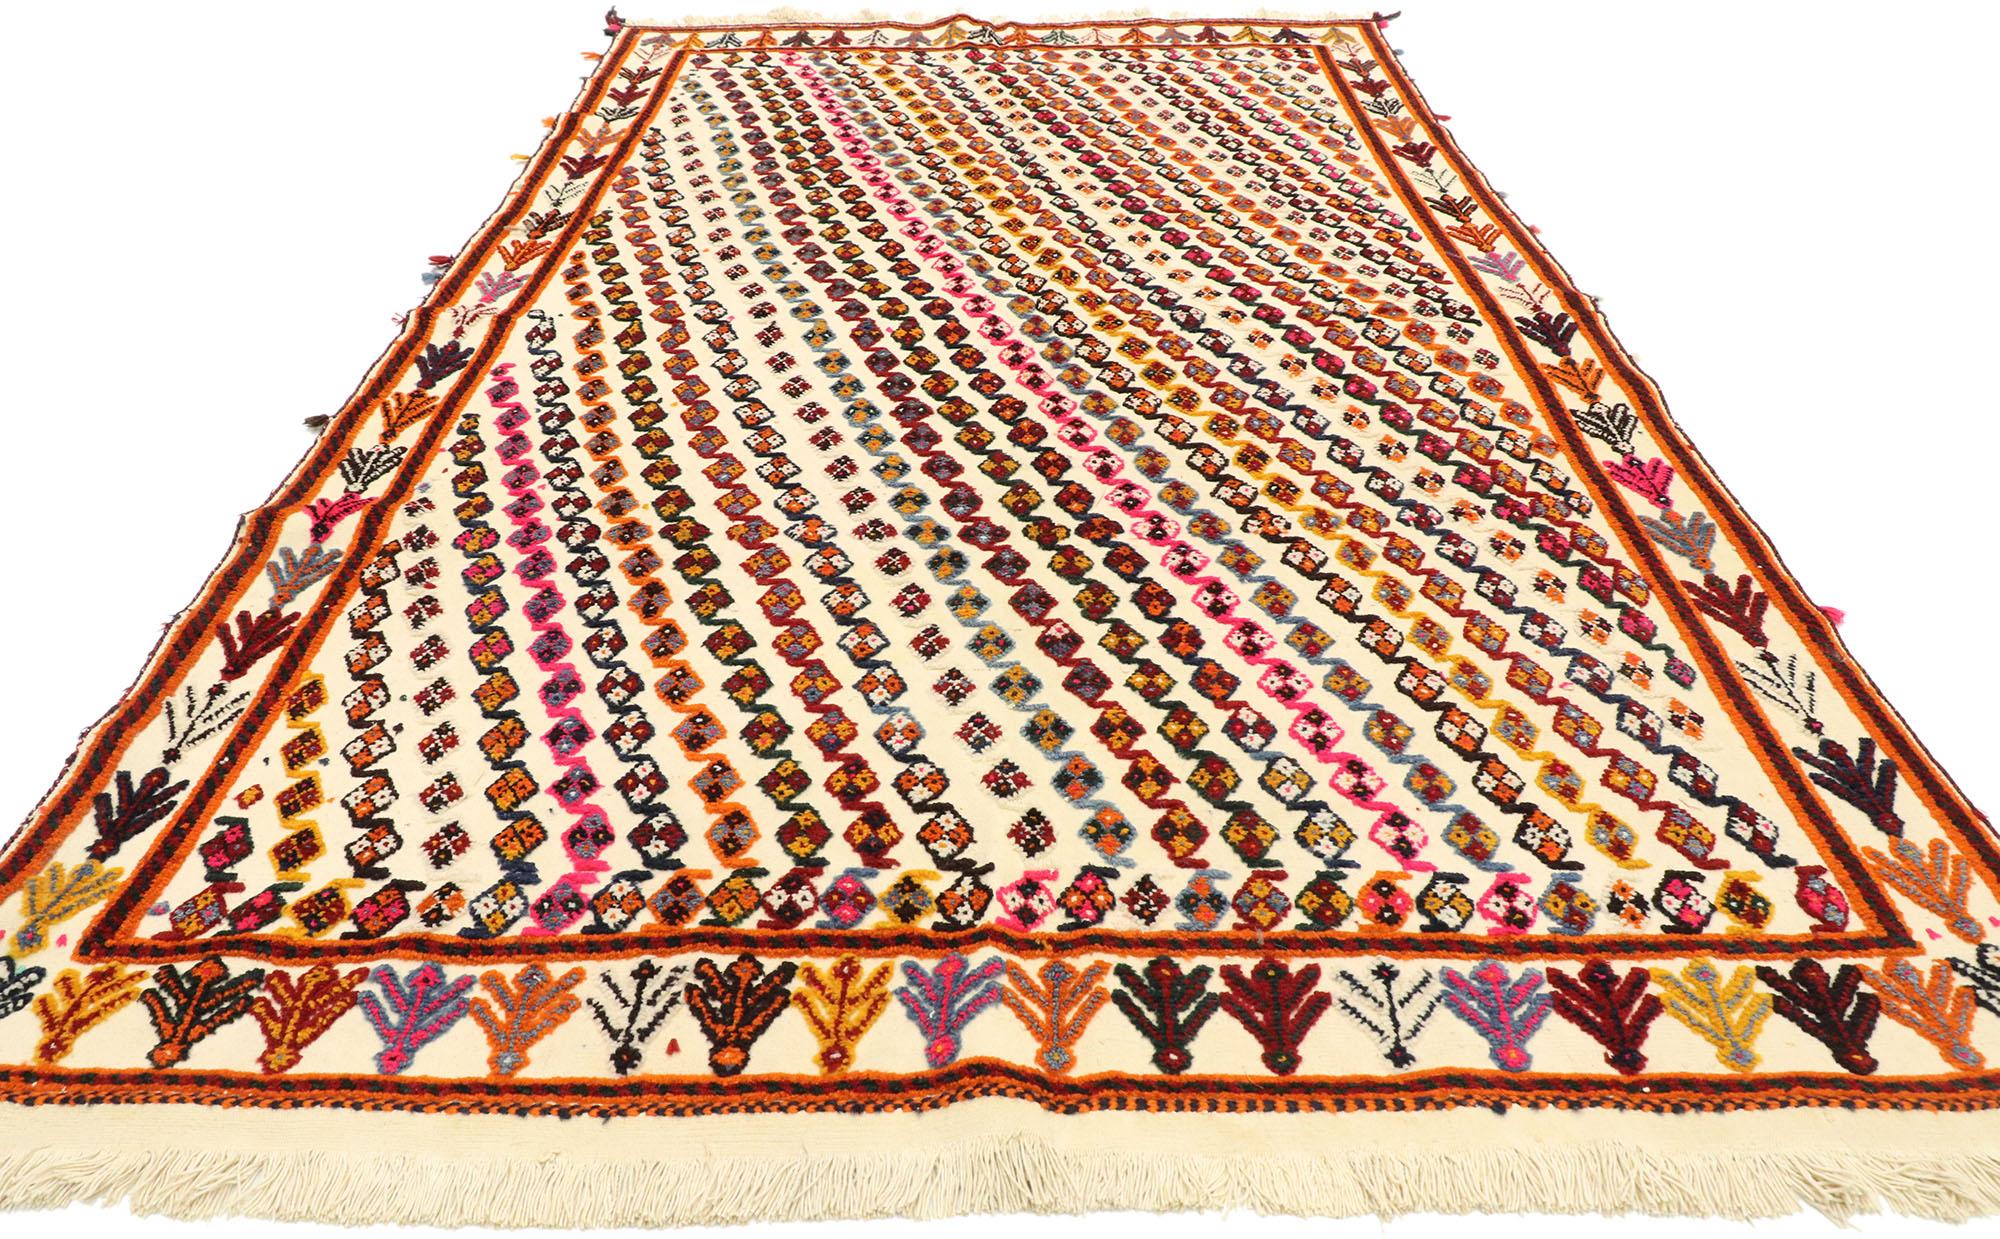 Hand-Woven Vintage Moroccan Souf Kilim Rug with Boho Chic Tribal Style, High-Low Rug For Sale